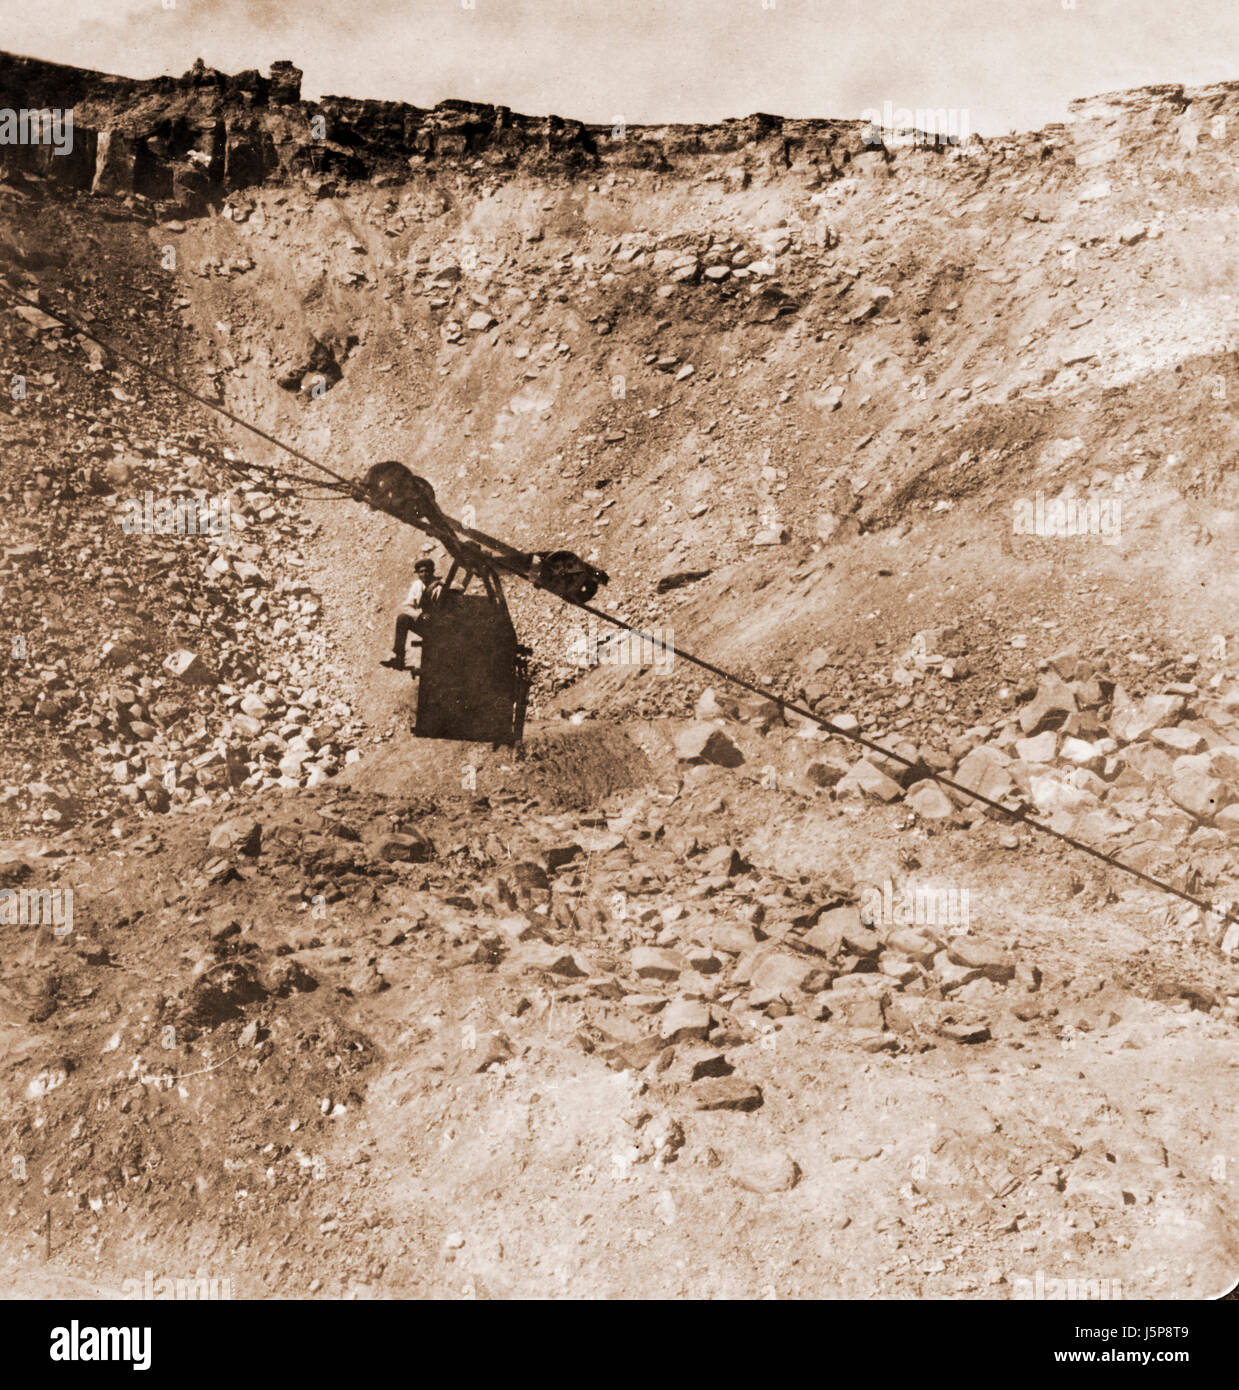 Trolley cage bound for bottom of diamond shaft Big Hole, Kimberley, South Africa, about 1900 Stock Photo